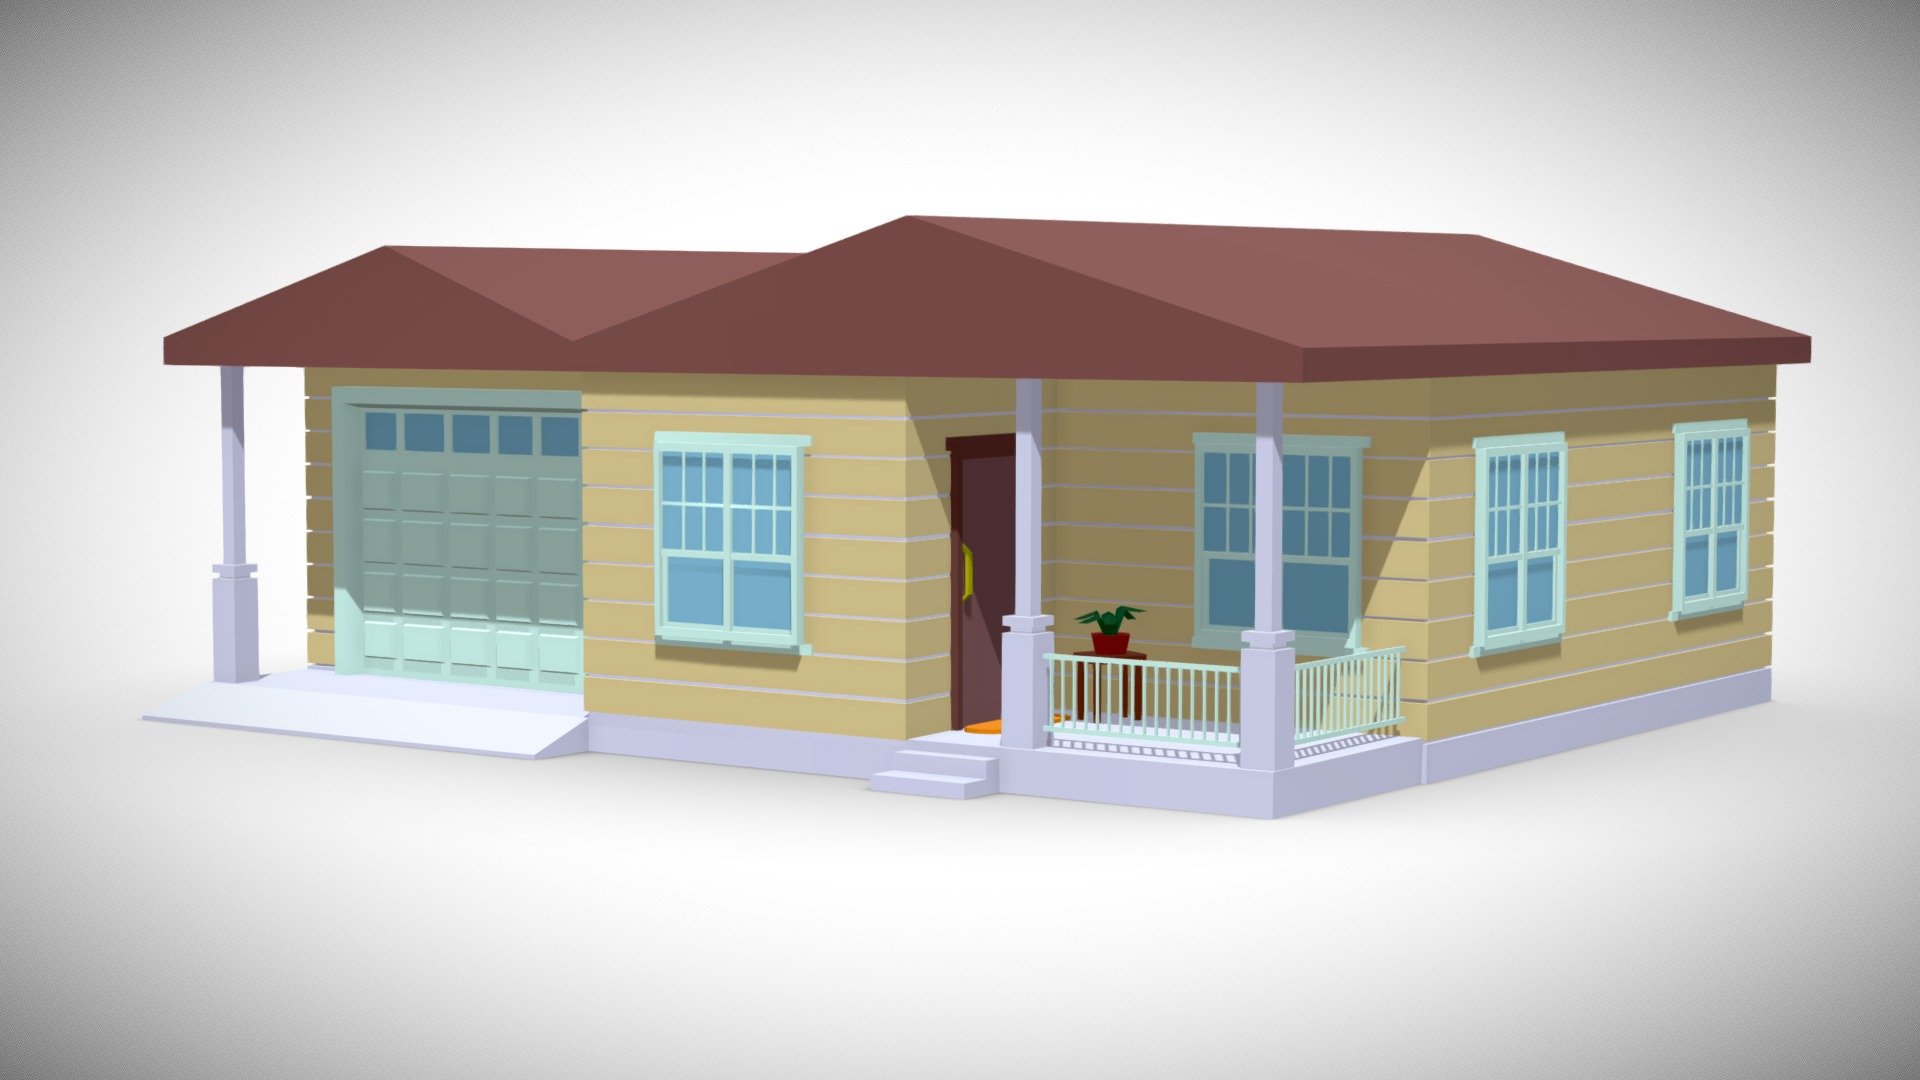 Lowpoly house with 1572 polys and a texture of 16x16 pixel for its flat colors
This house has its pivot in its bottom and center so it can be placed easily in your scene - Lowpoly House with Garage - Buy Royalty Free 3D model by rfarencibia 3d model